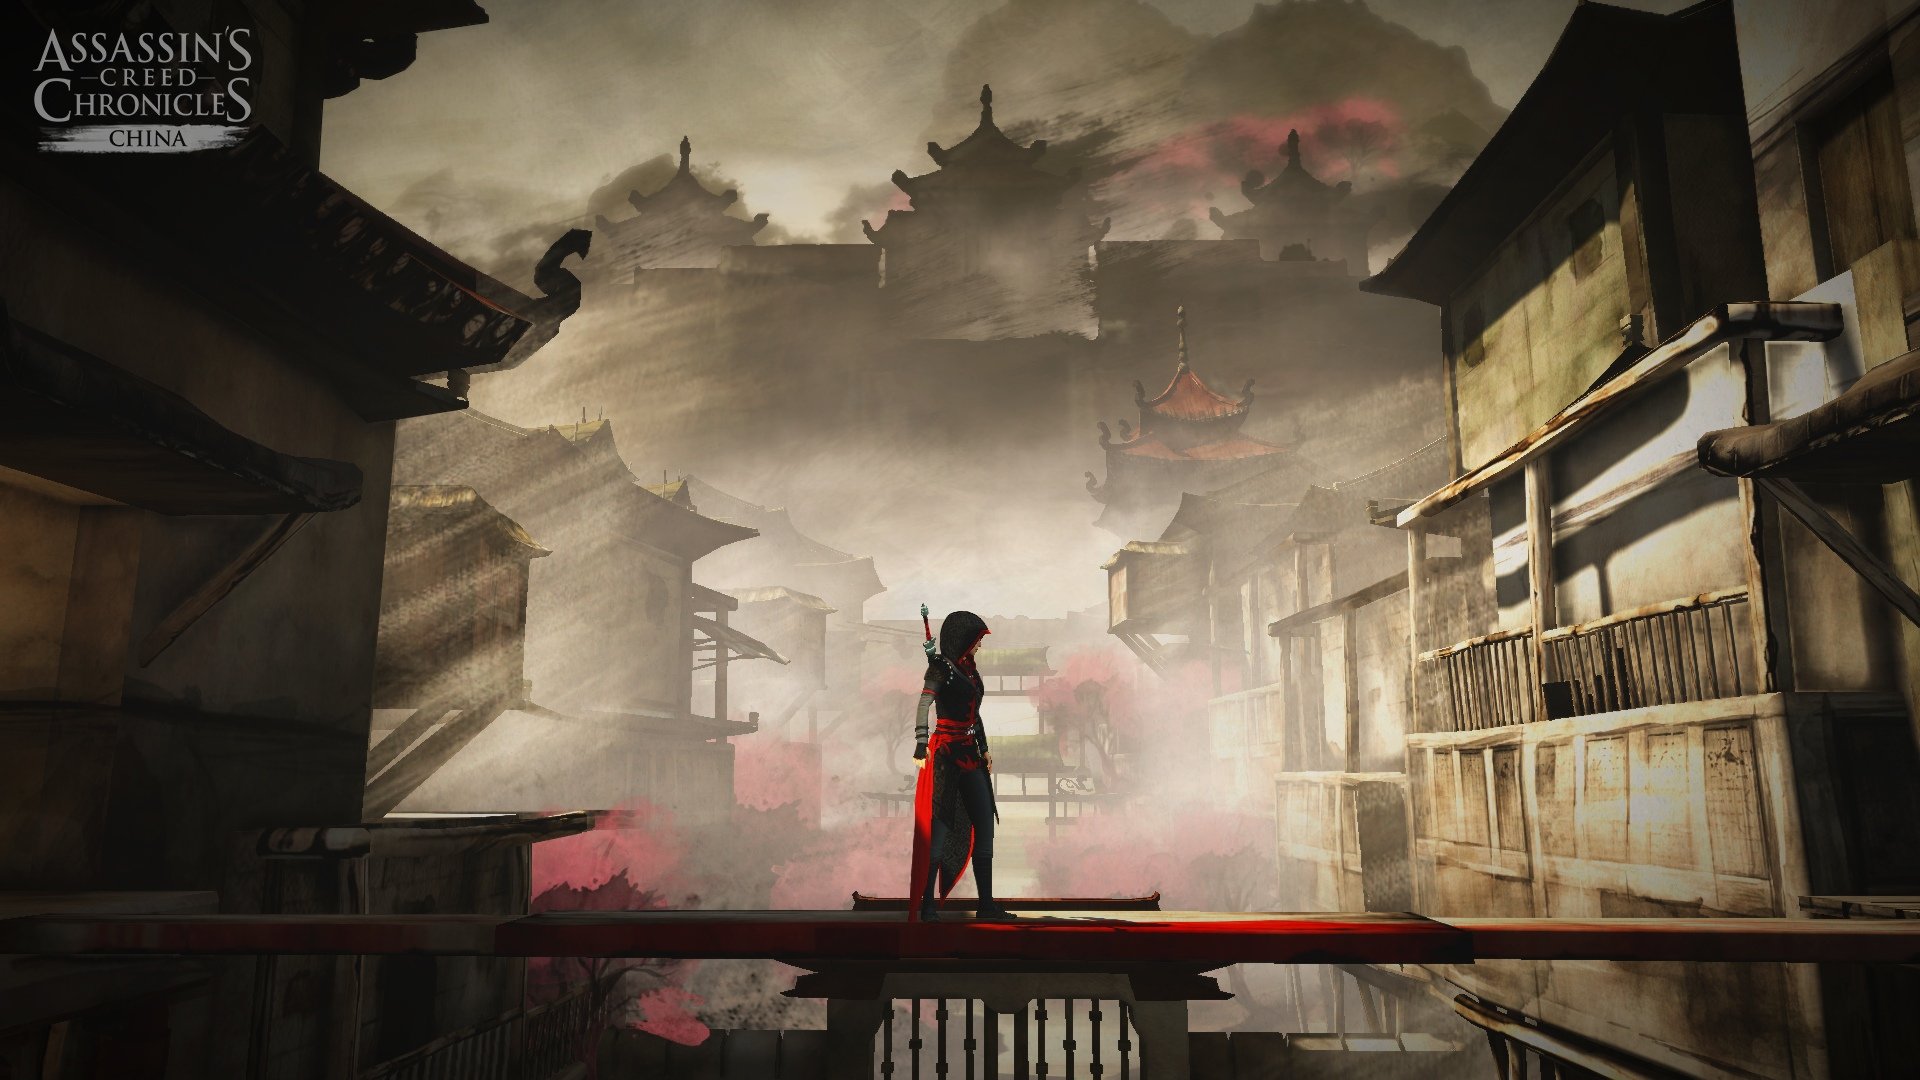 Assassins creed chronicles steam фото 58